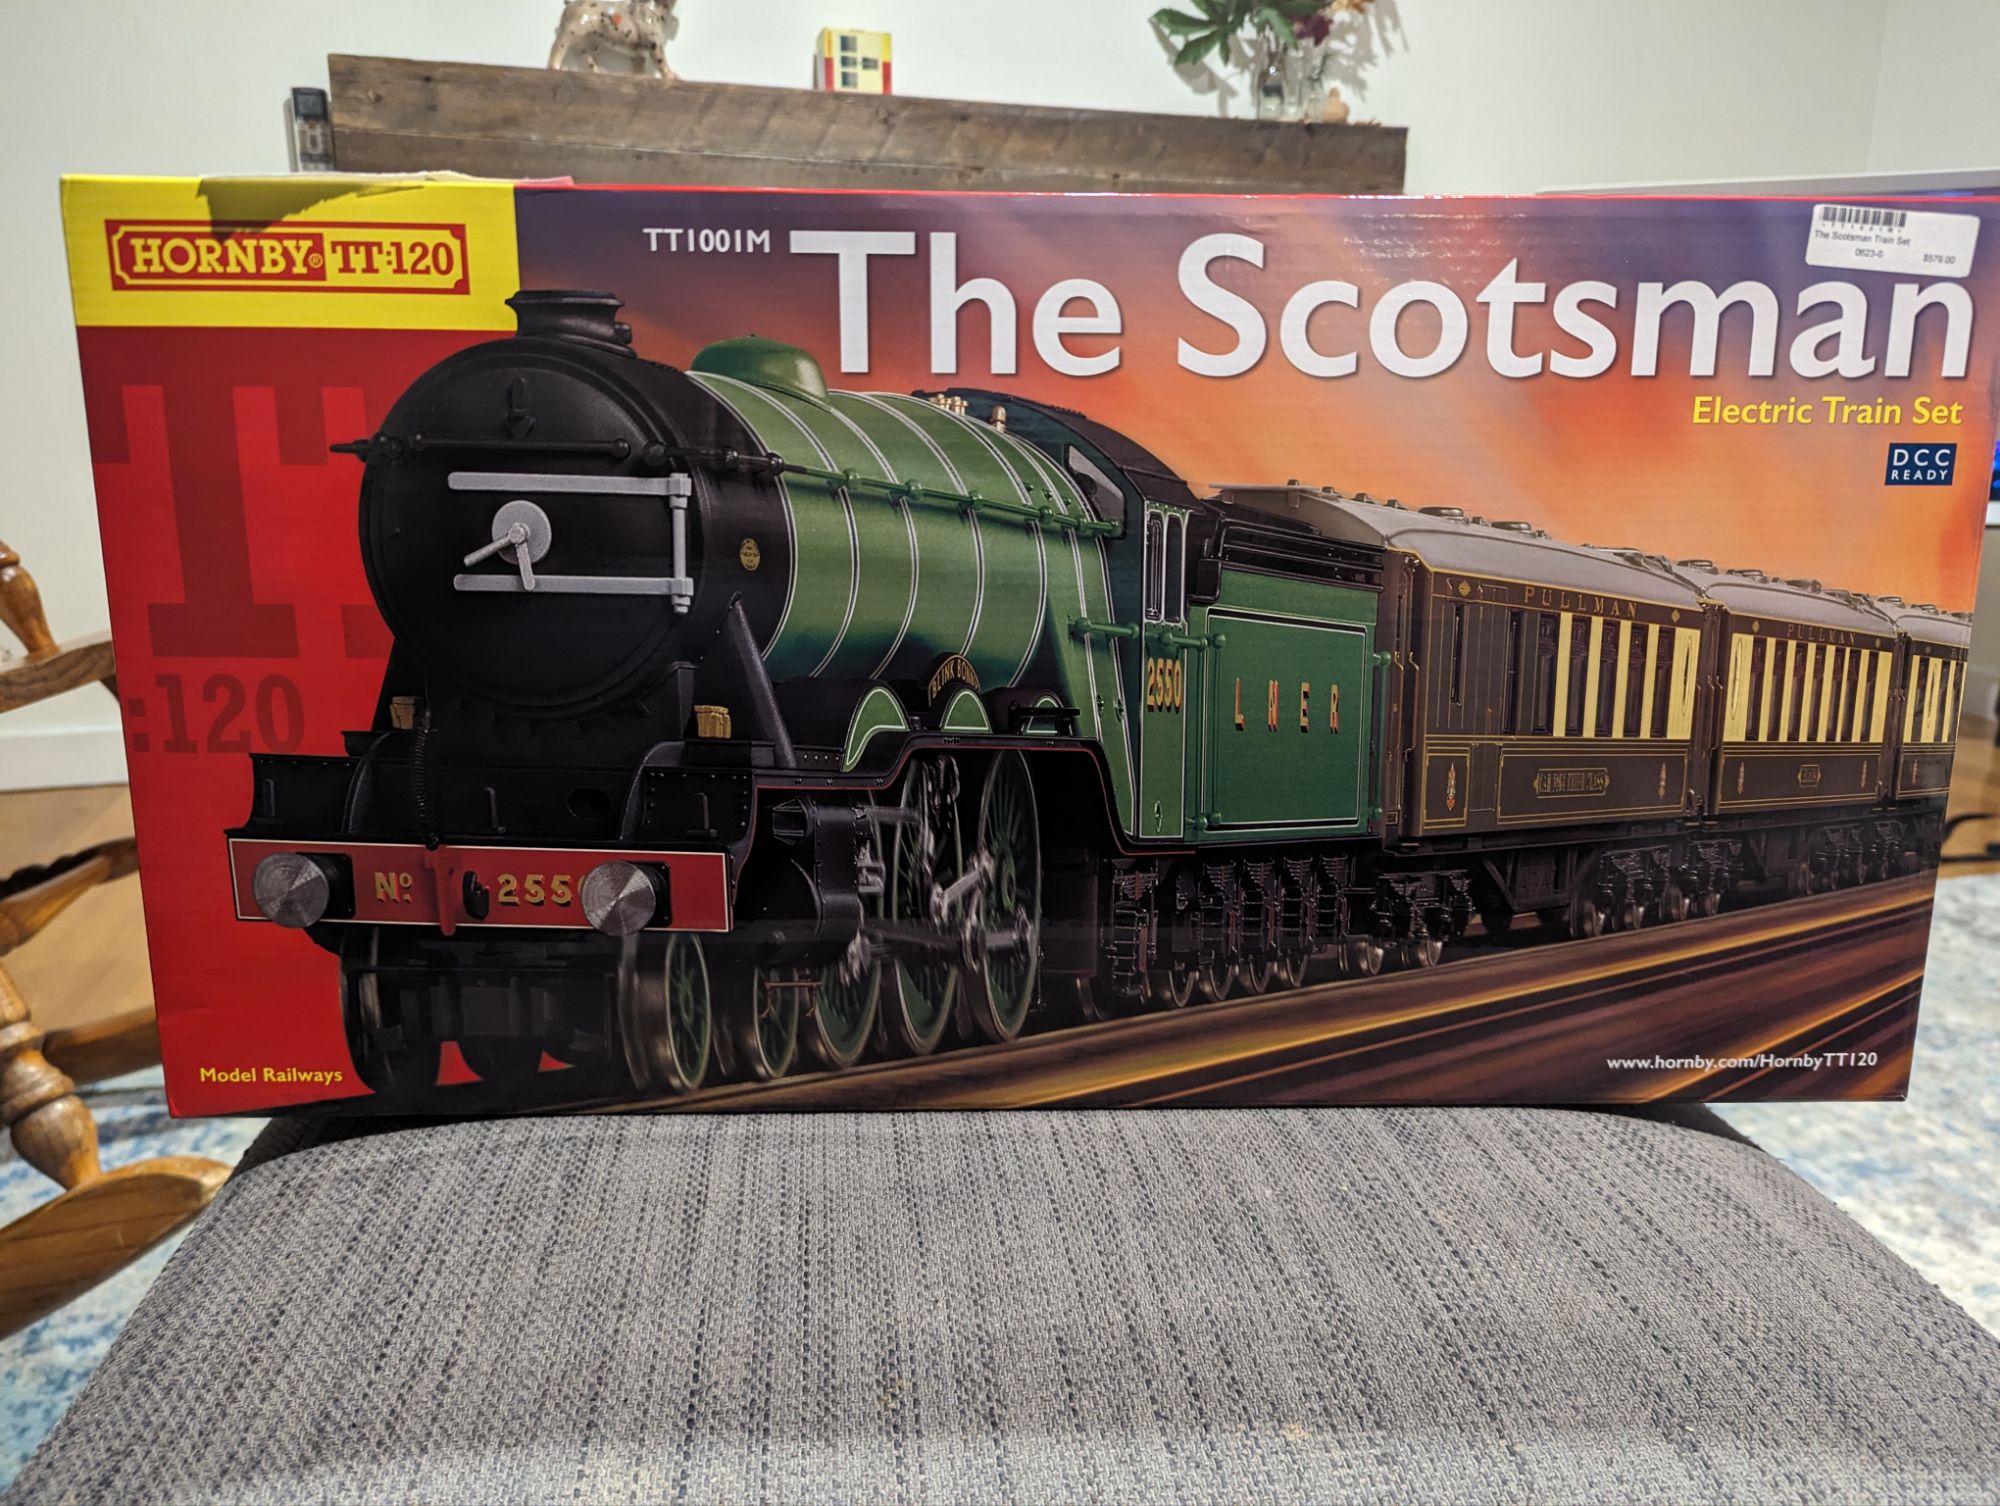 Officially opening the flying Scotsman set.